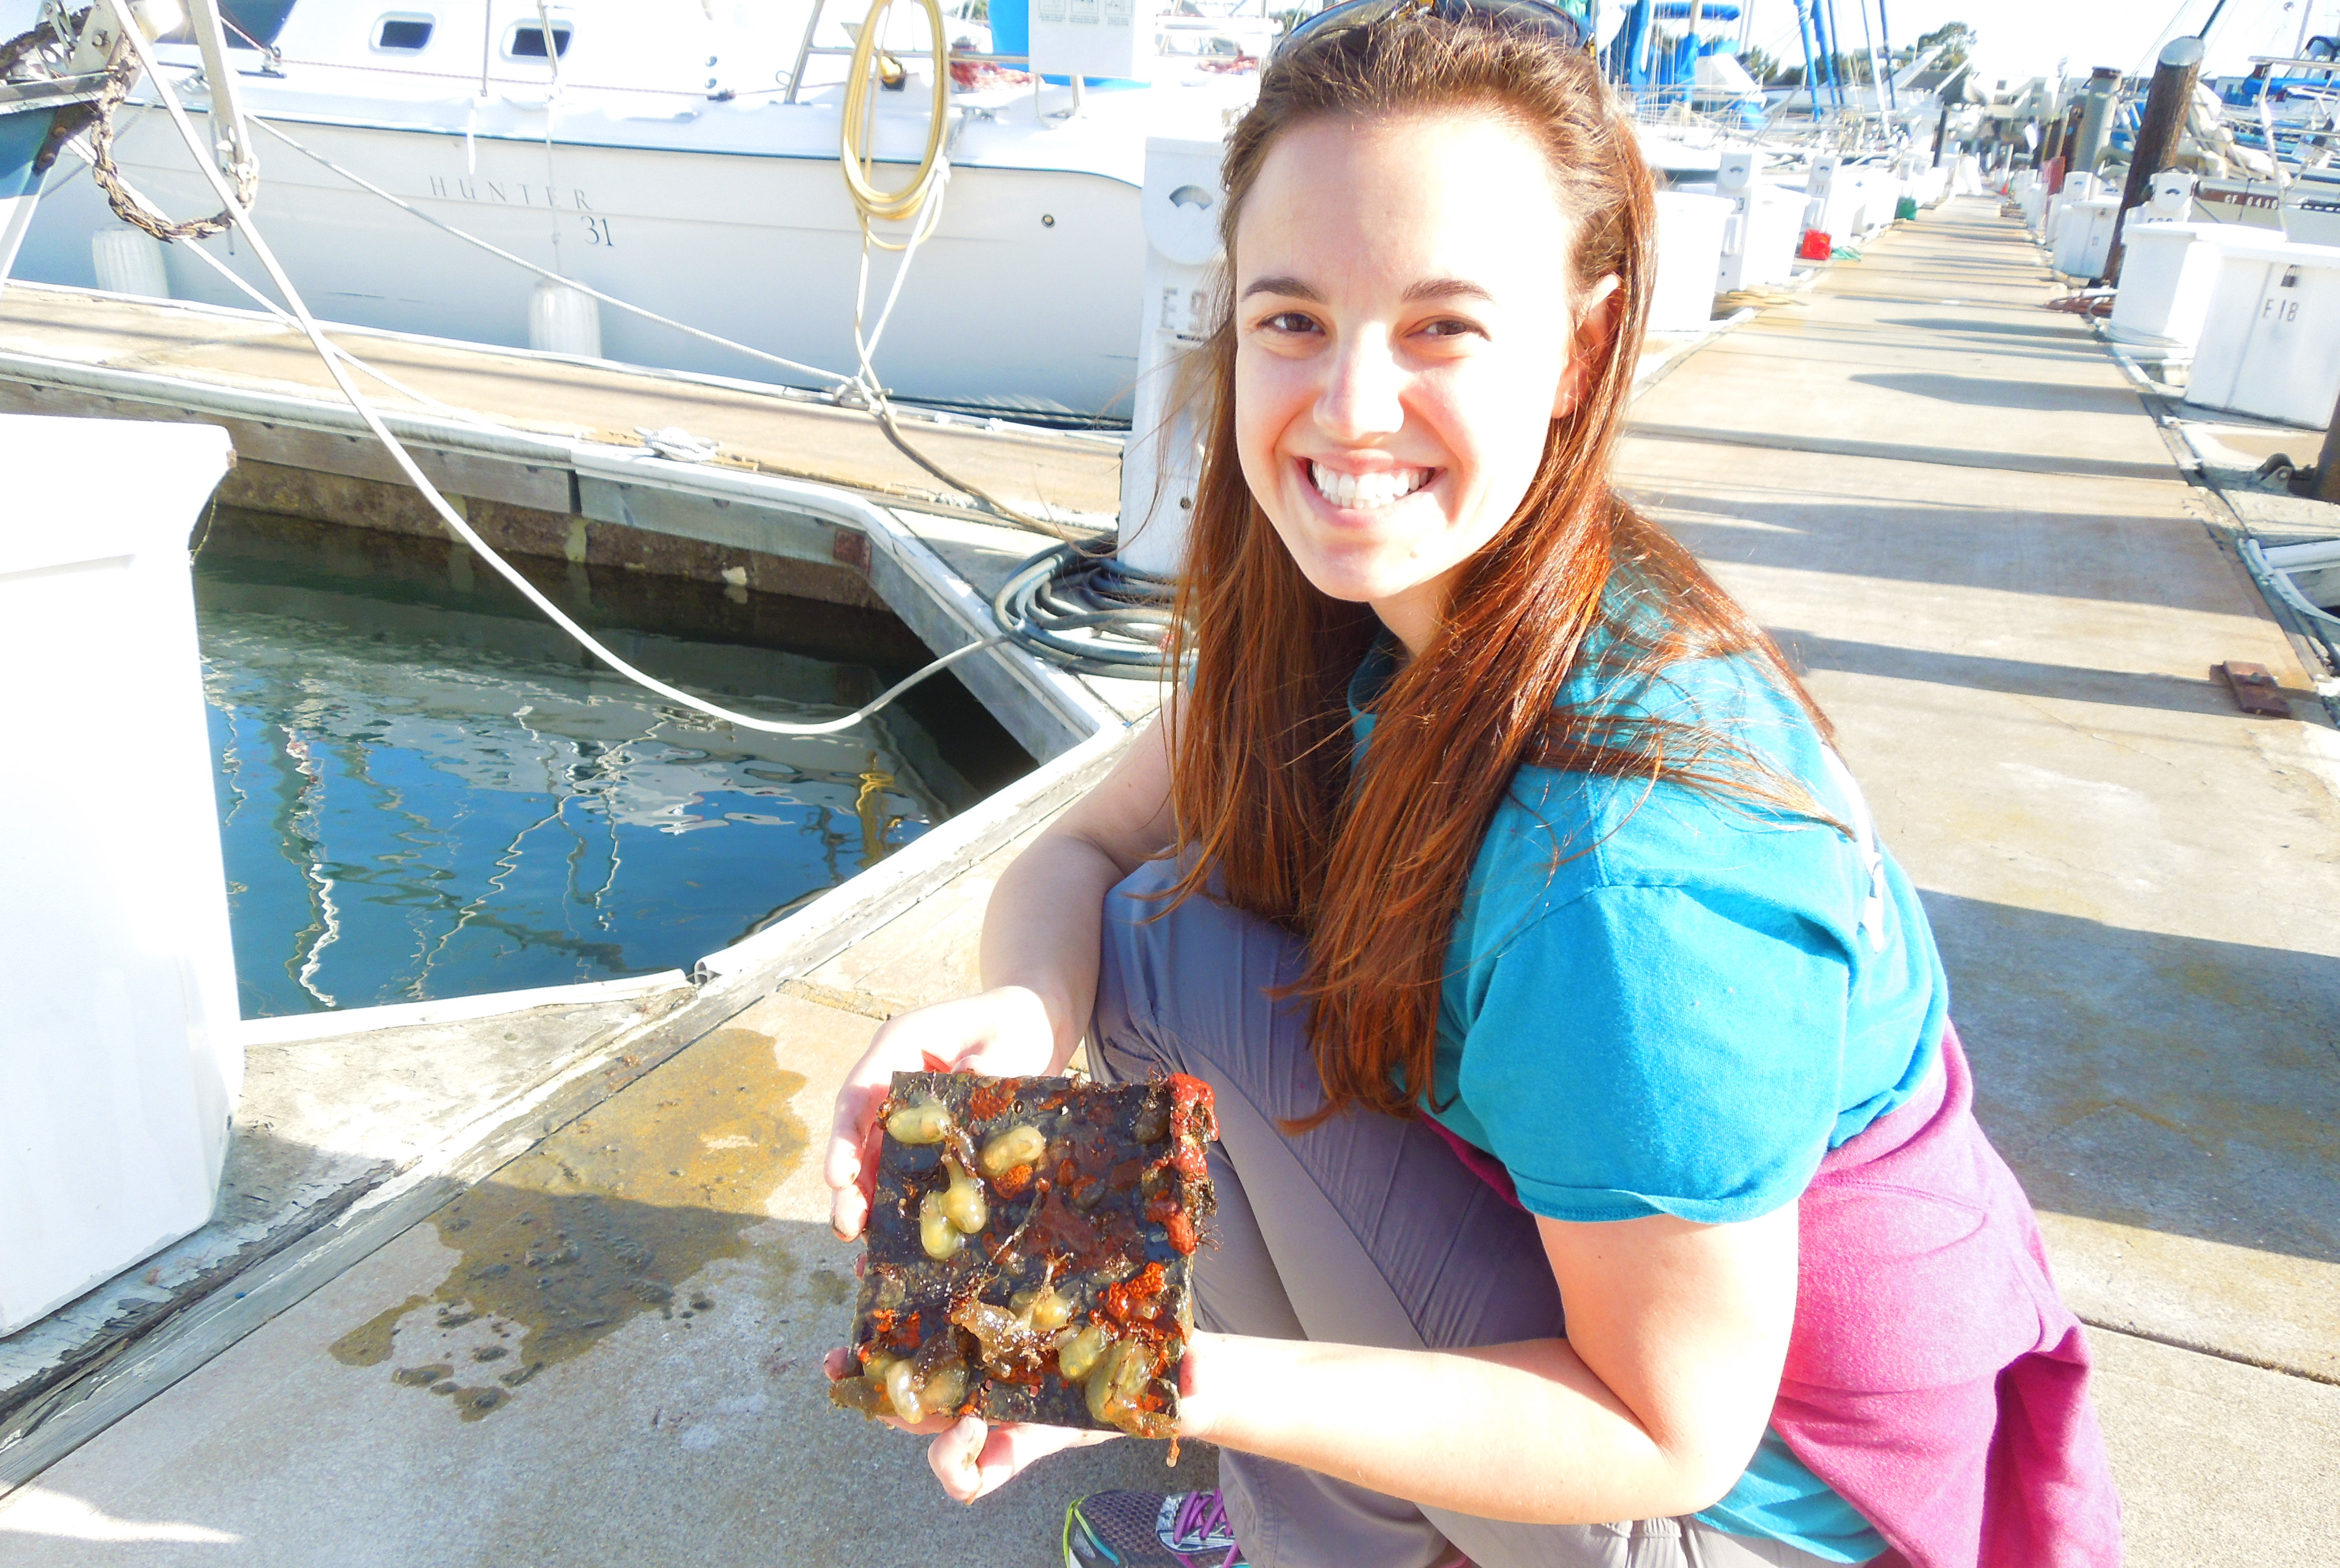 Woman on docks holding plate with marine life, similar to the plates seen on Invader ID